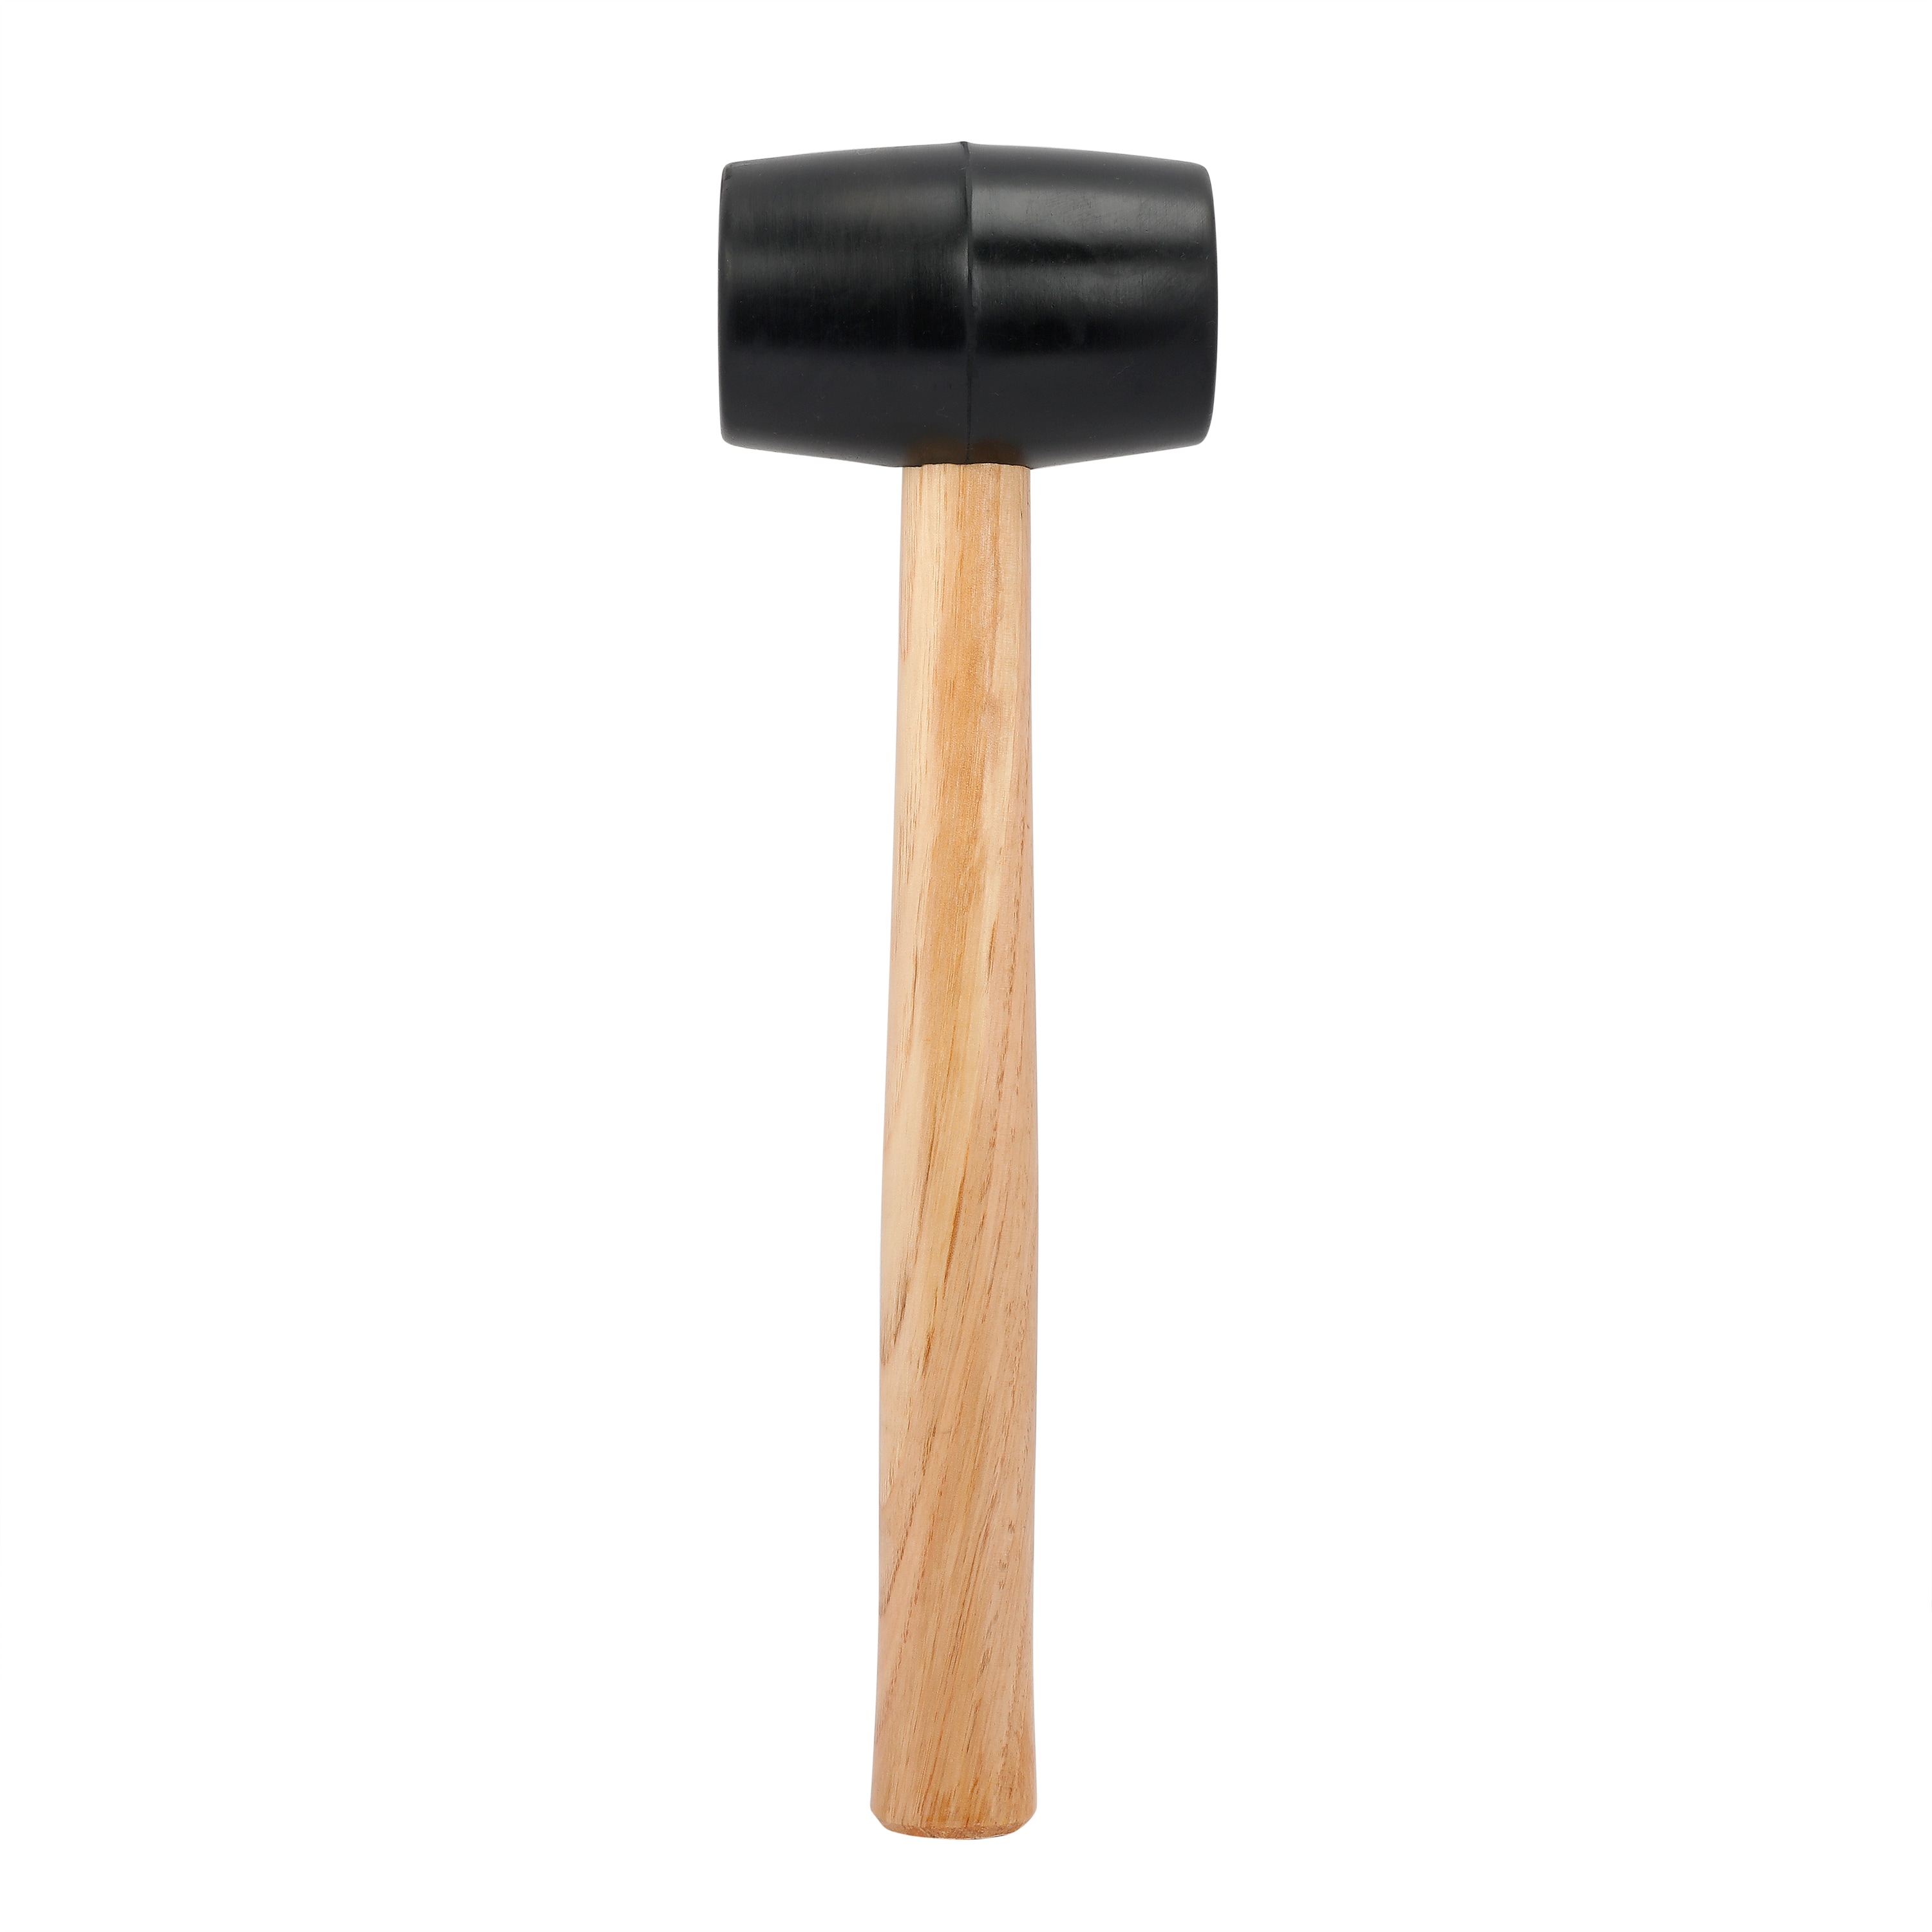 Small Hammer, High Strength Multipurpose Practical Rubber Hammer Soft Grip  for Woodworking 